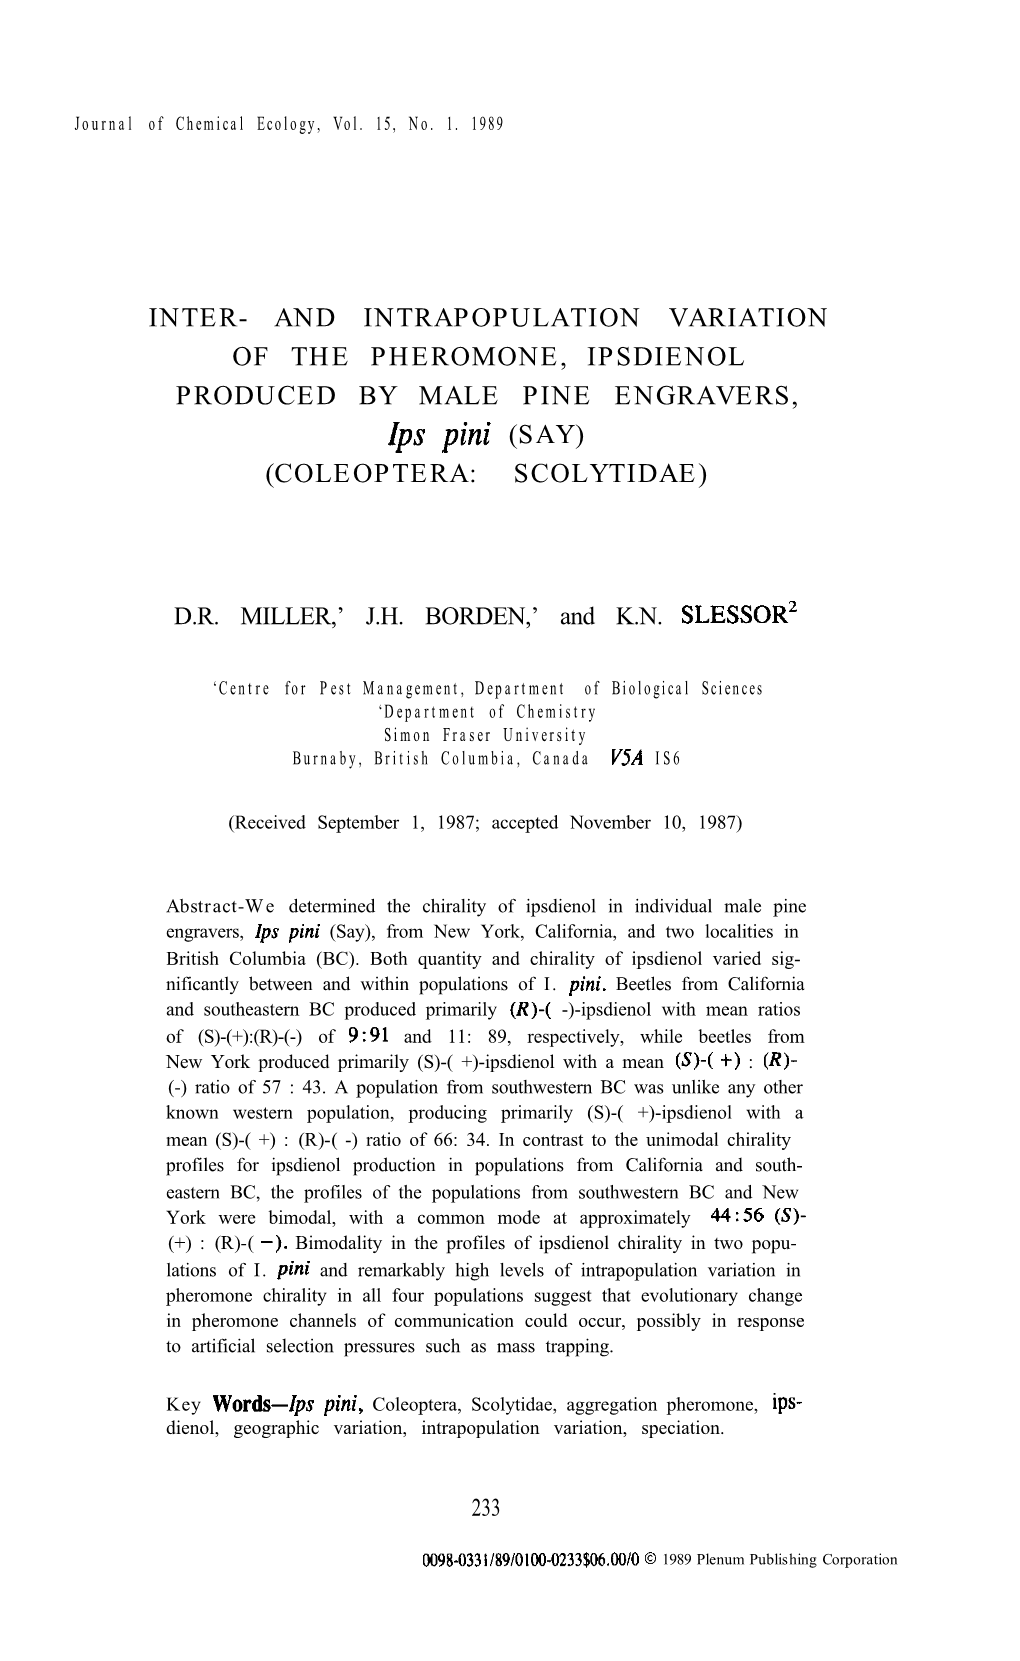 Inter- and Intrapopulation Variation of the Pheromone, Ipsdienol Produced by Male Pine Engravers, (Coleoptera: Scolytidae)